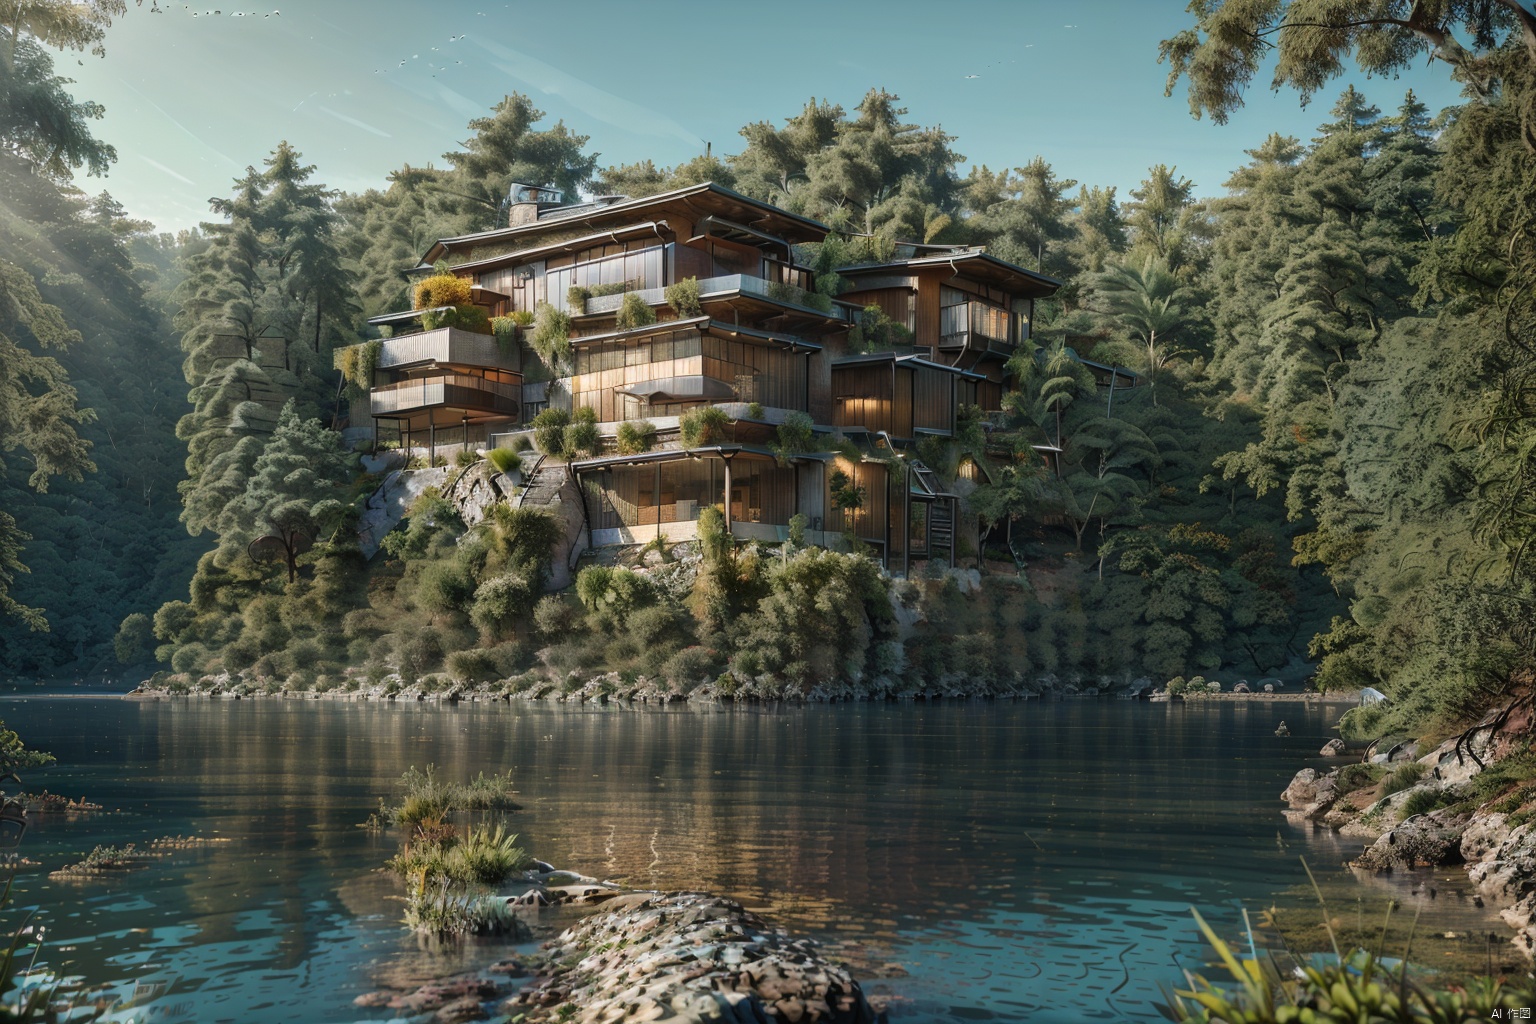  submarine villa,forest,villa in the forest,amazing architecture, outdoors,bird,flsh,boat,
building,water,scenery,ray tracing,best quality,extreme detail,masterpiece,UHD,16k,wallpaper,poster,film texture,award-winning, dvarchmodern,scenery wallpaper, ArchModern